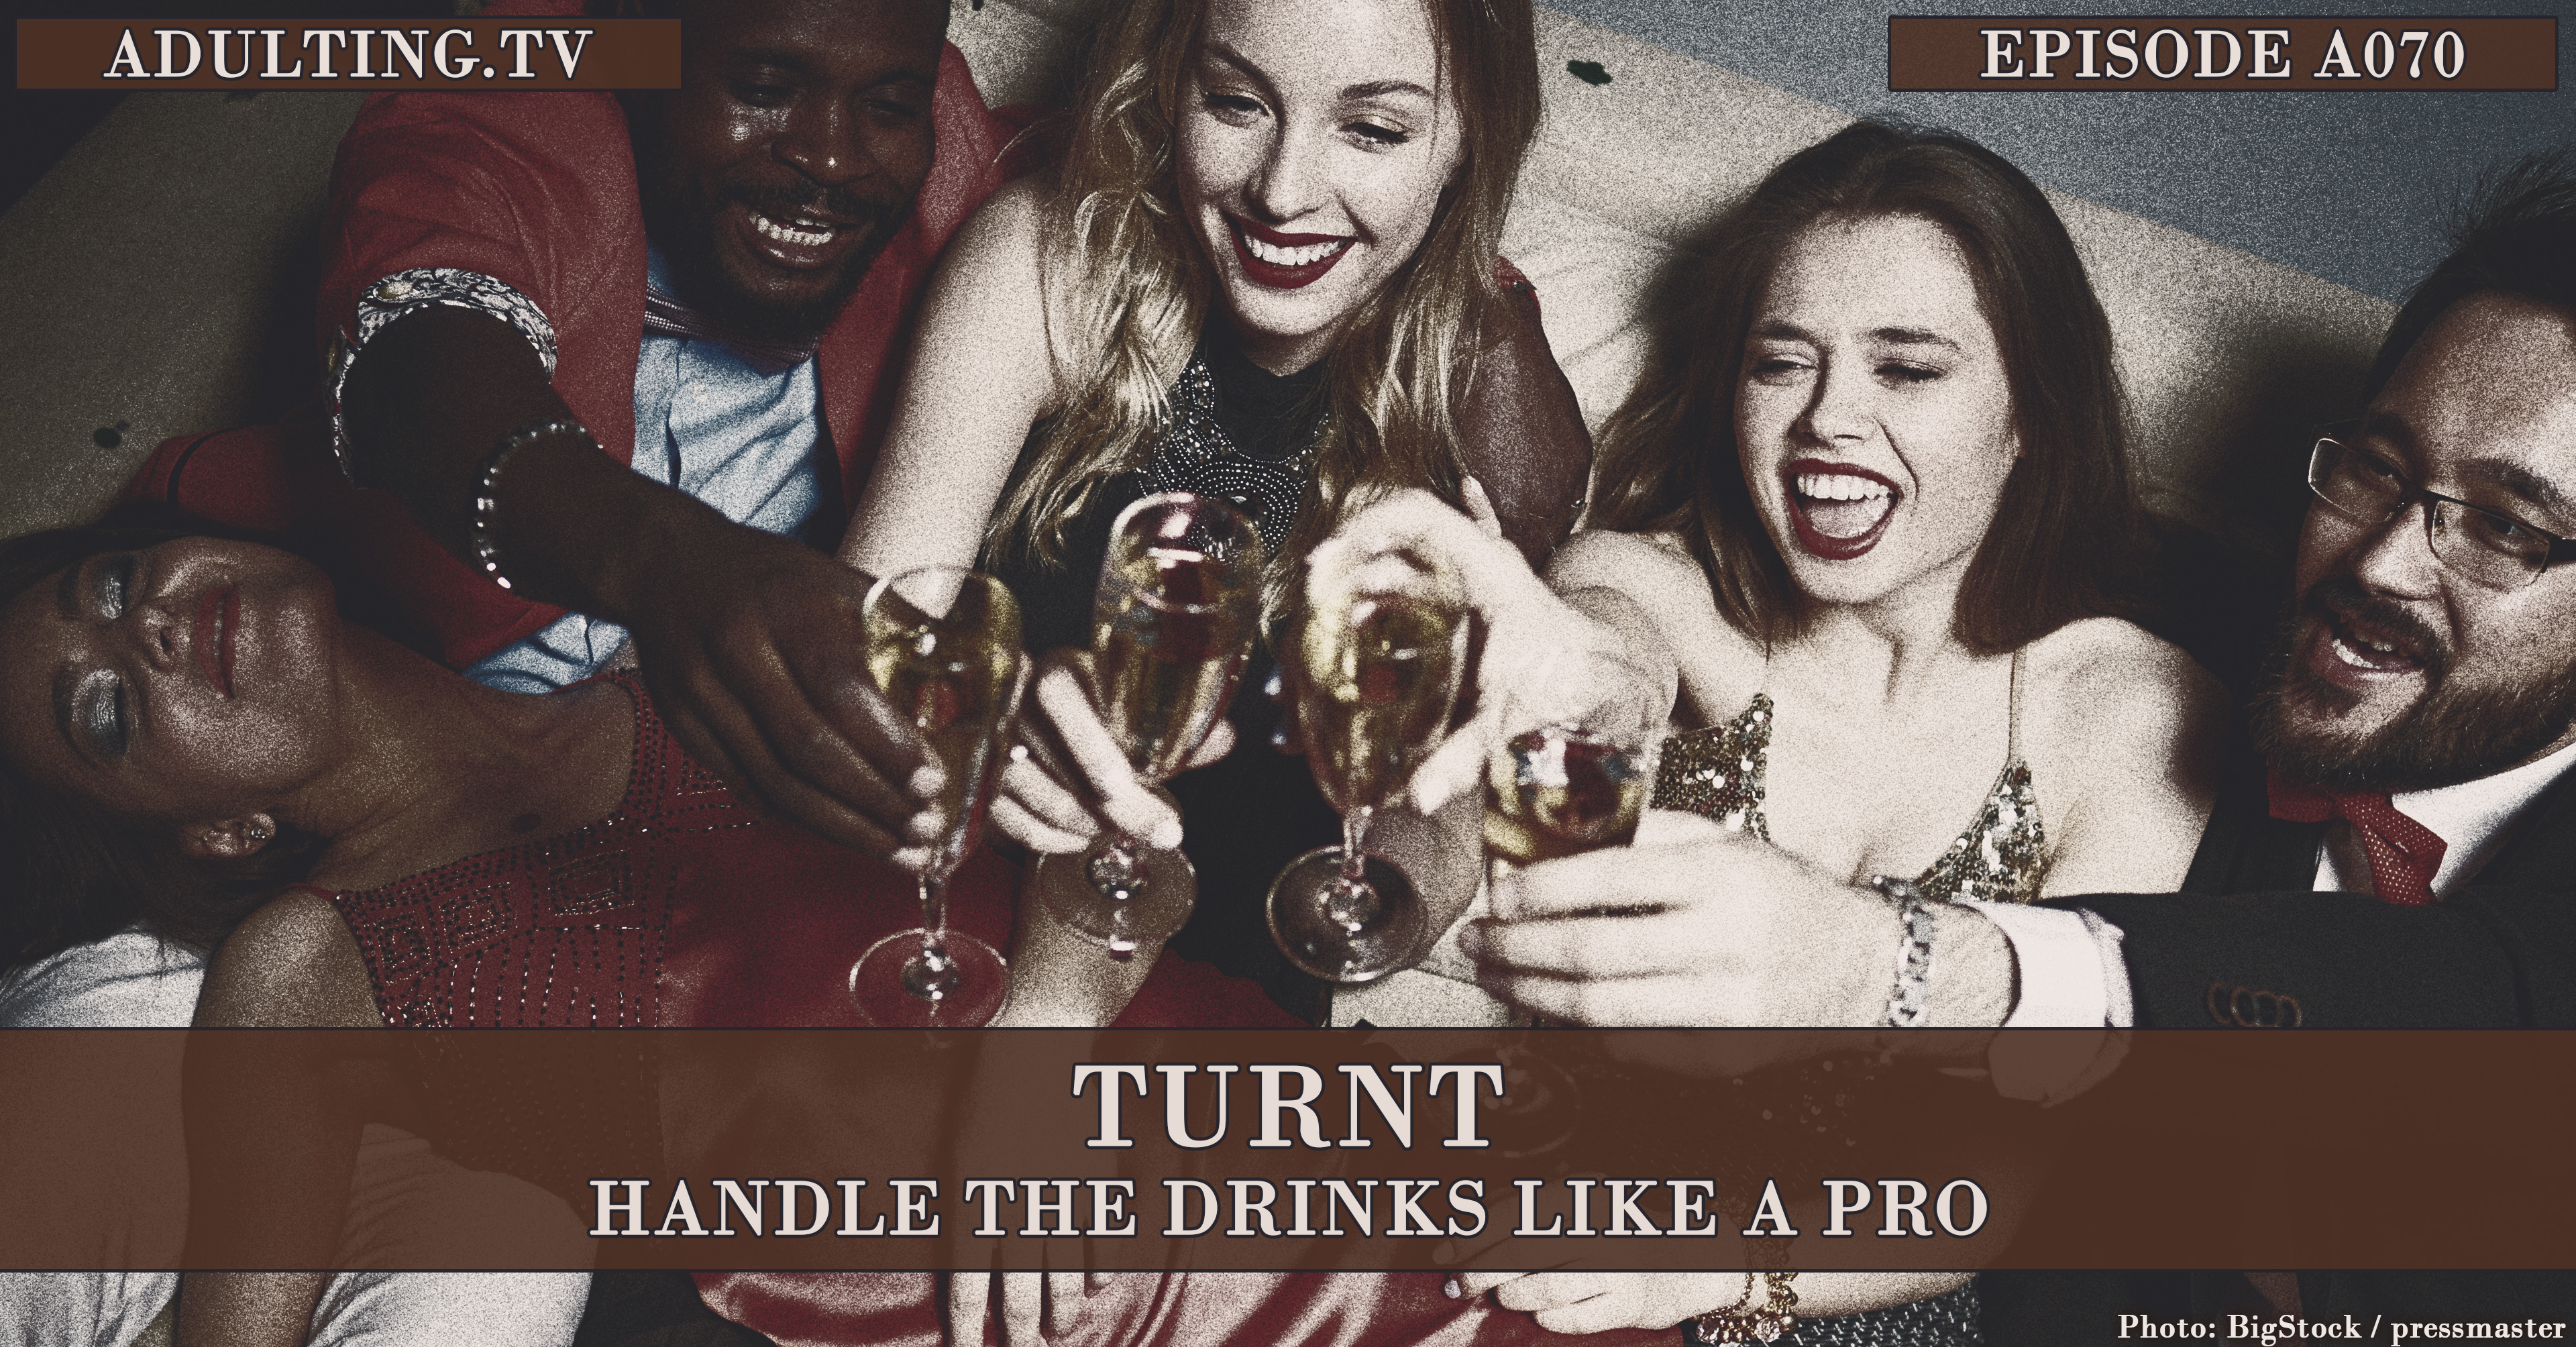 [A070] Turnt: Handle the Drinks Like a Pro